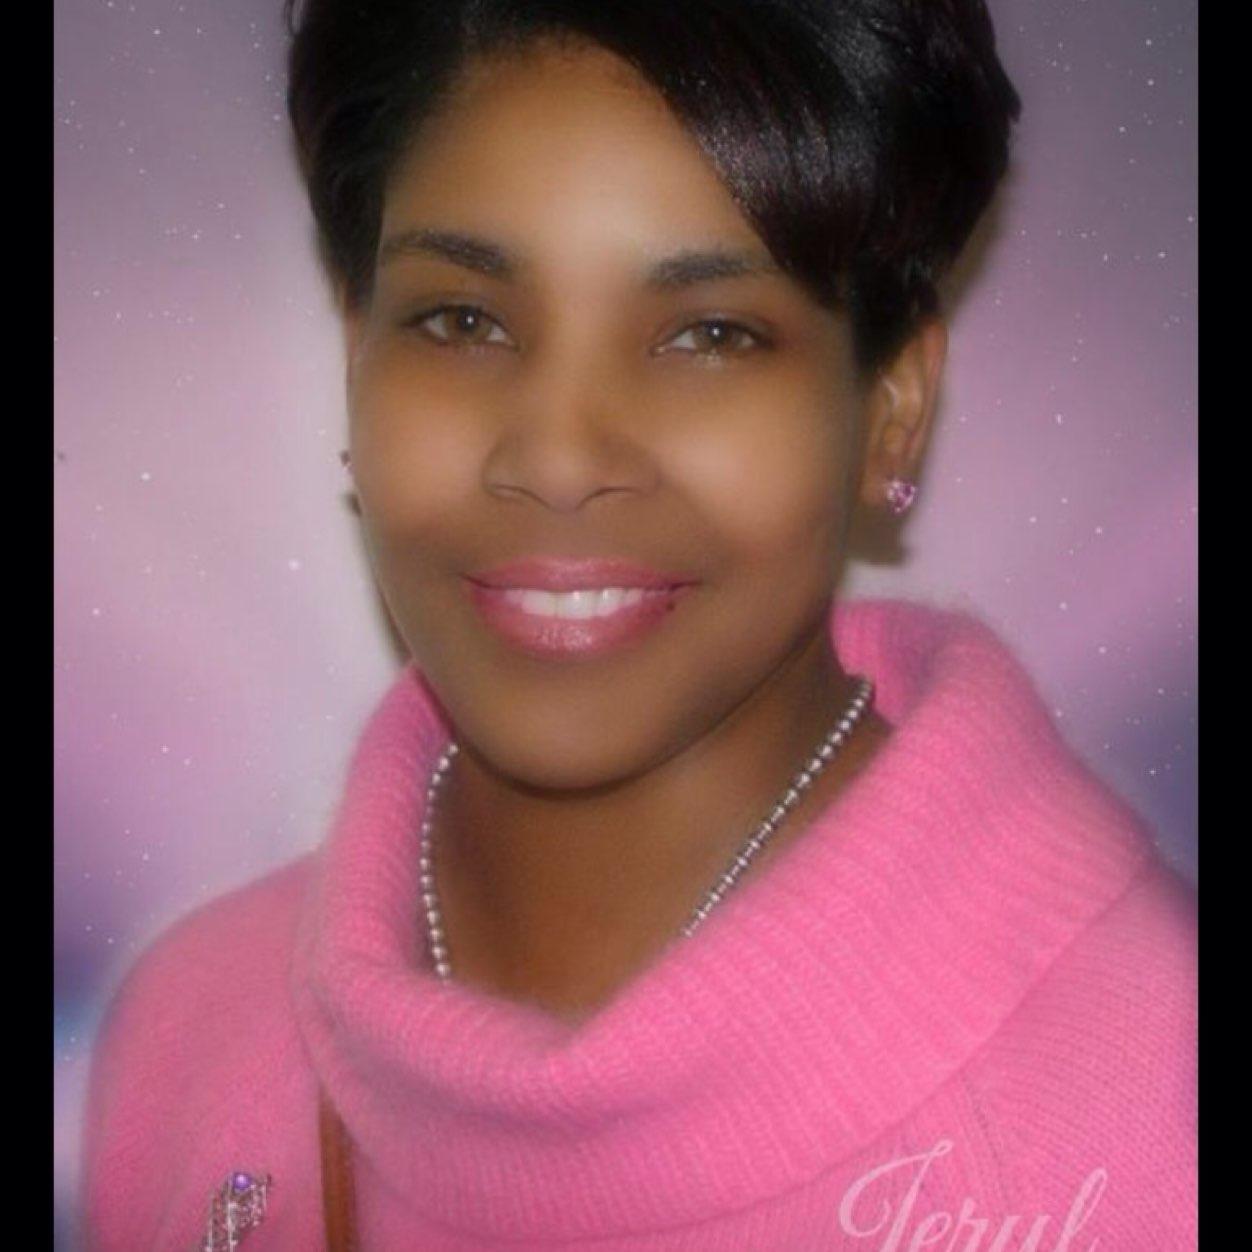 Studied Criminal Justice, married to Tony ret US Army,my BF. 3 Black sons. Loves God & my family! Breast Cancer & Lupus Fighter/Survivor/Warrior! #BLM